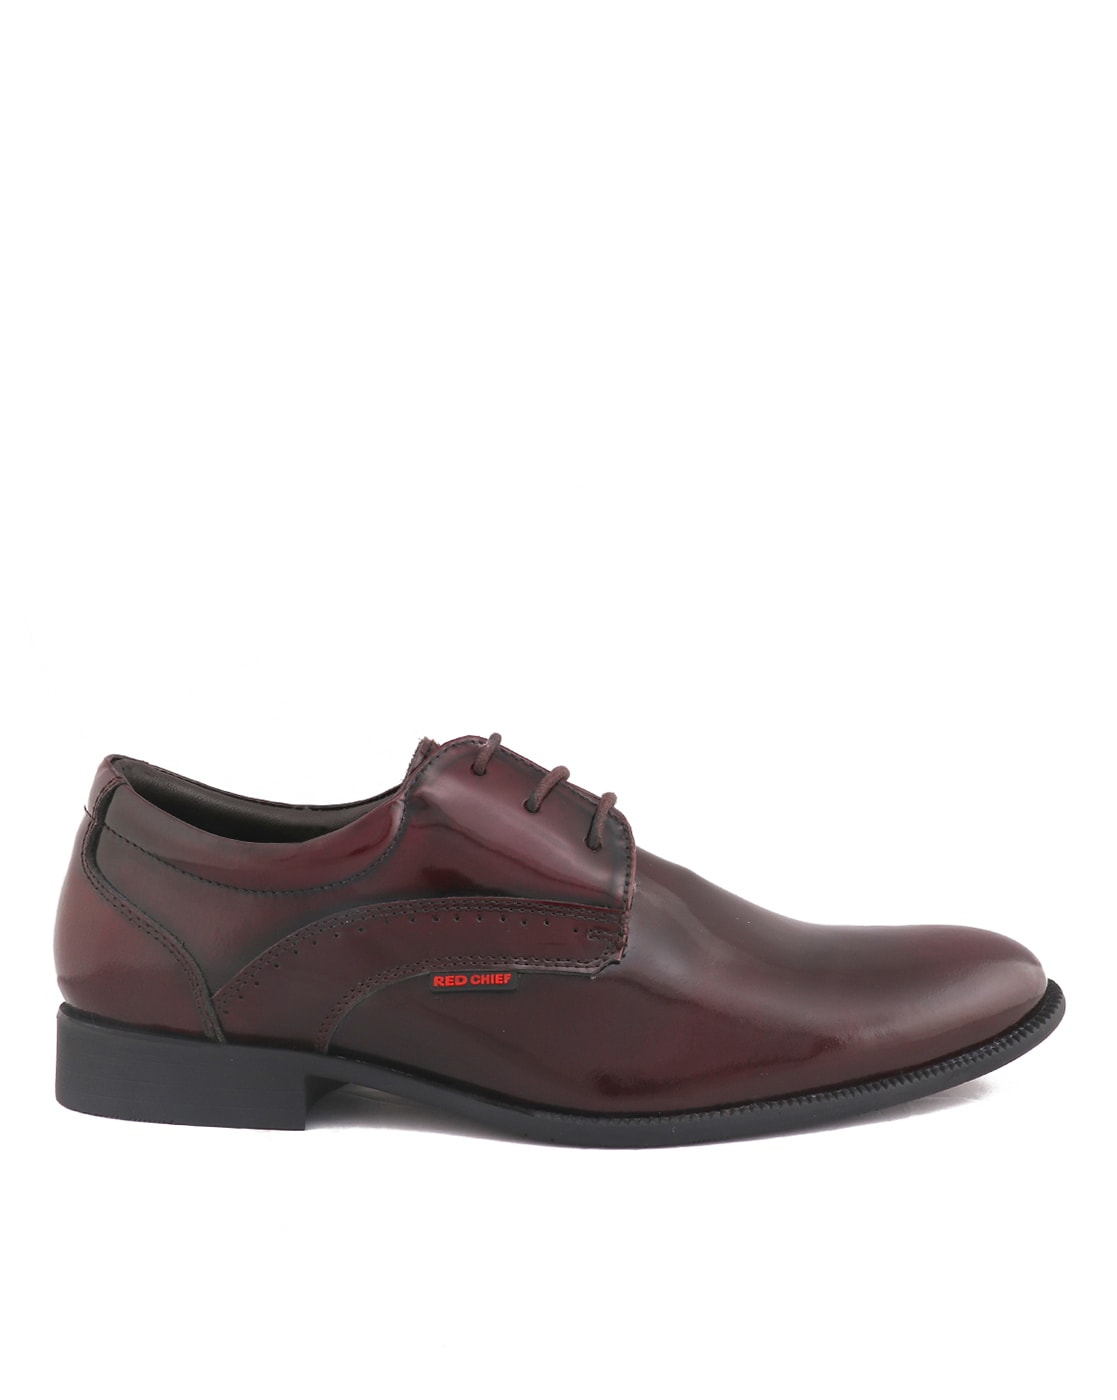 Red Formal Shoes - Buy Red Formal Shoes online in India